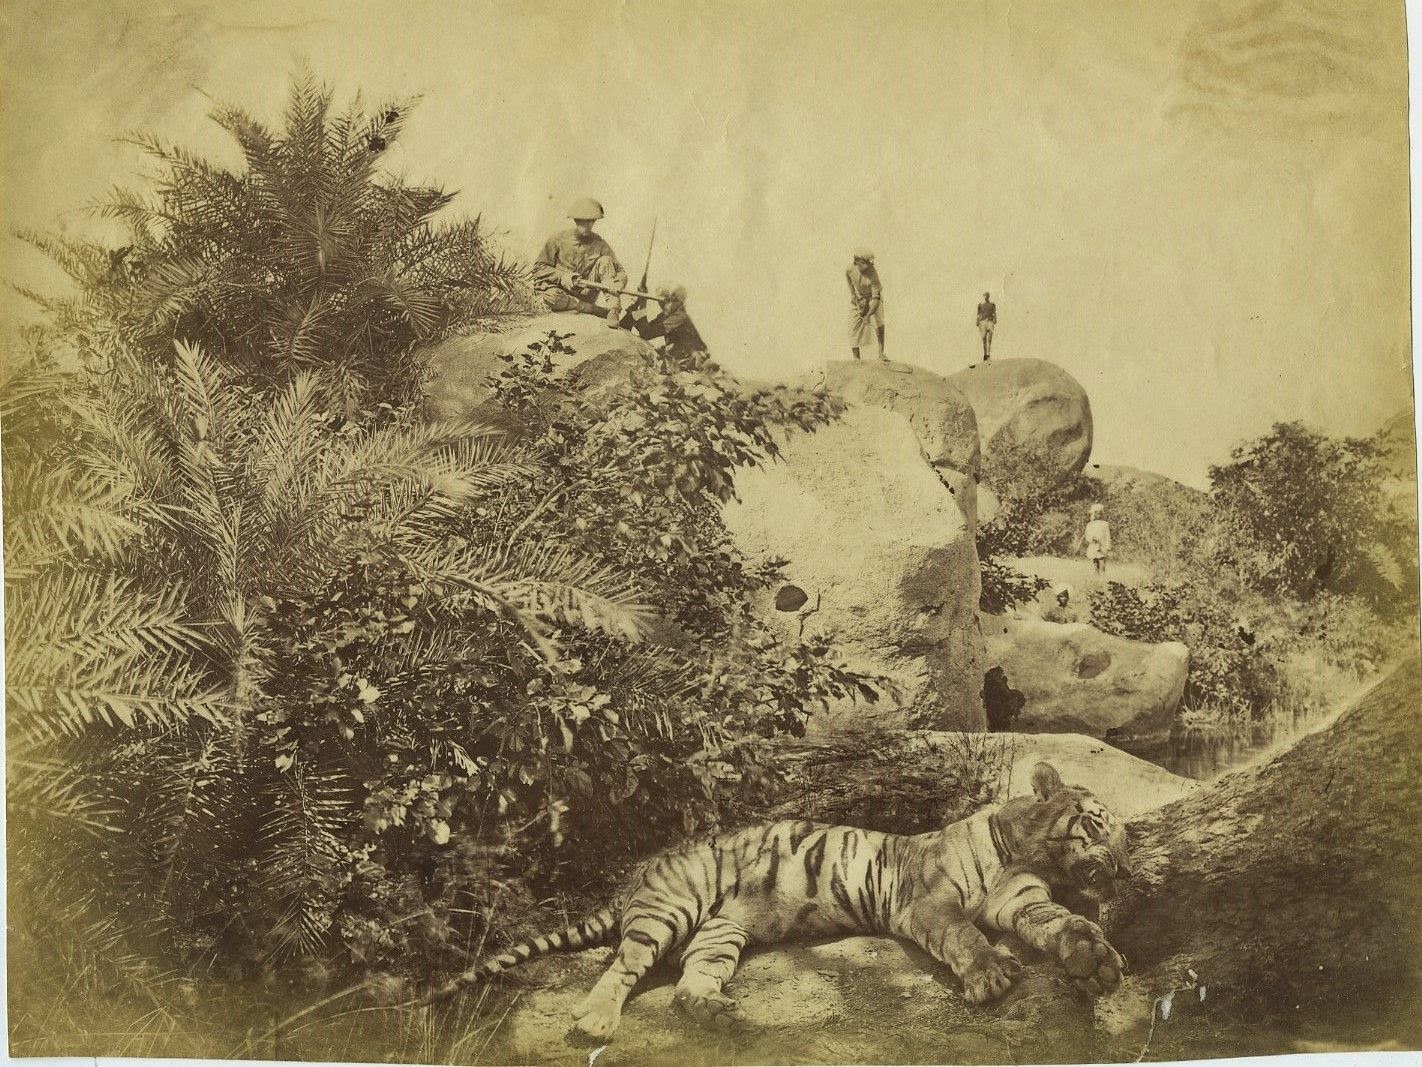 Dead Tiger and Hunters - India c1880's